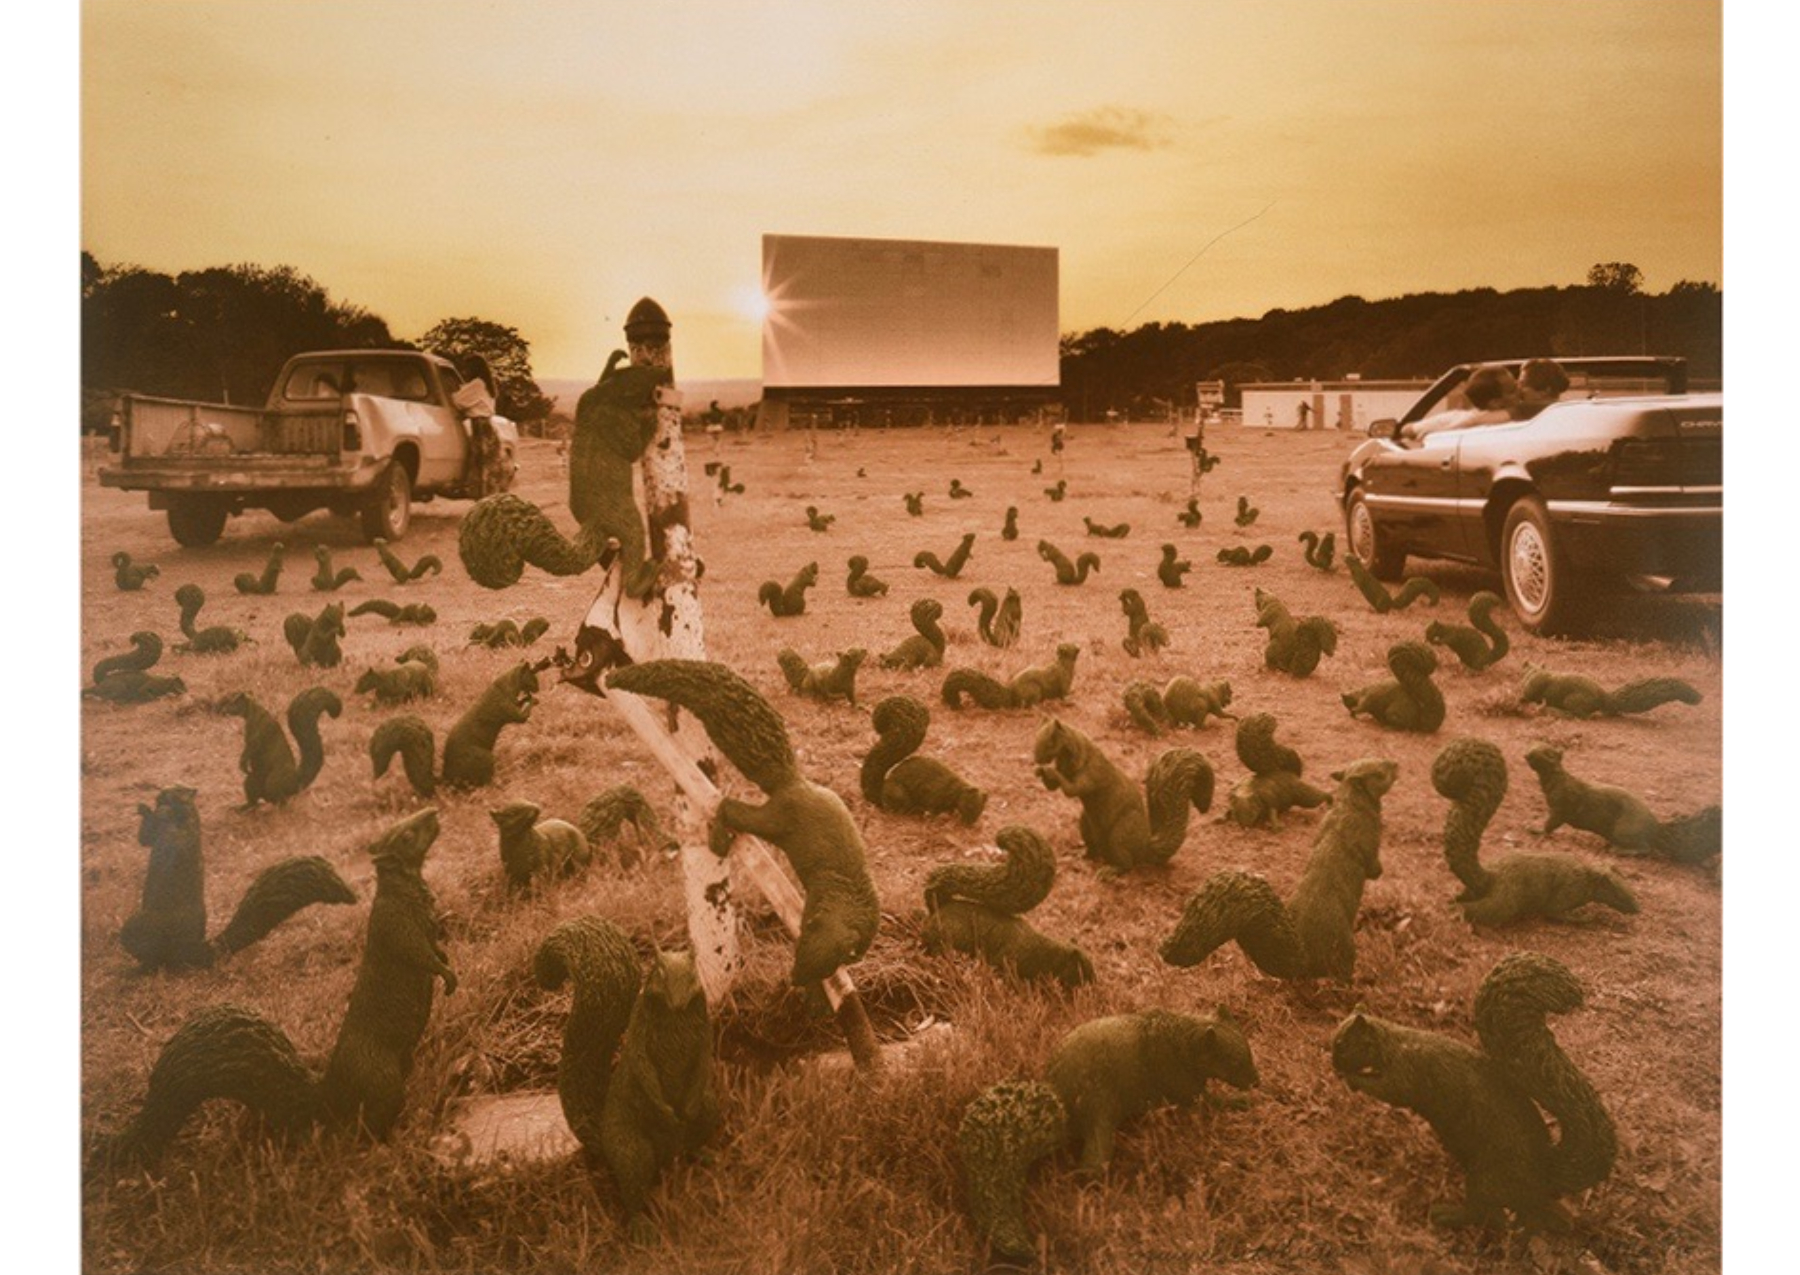 Sepia-tone photo of hundreds of squirrels at a nearly-empty drive-in movie theater at sunset.